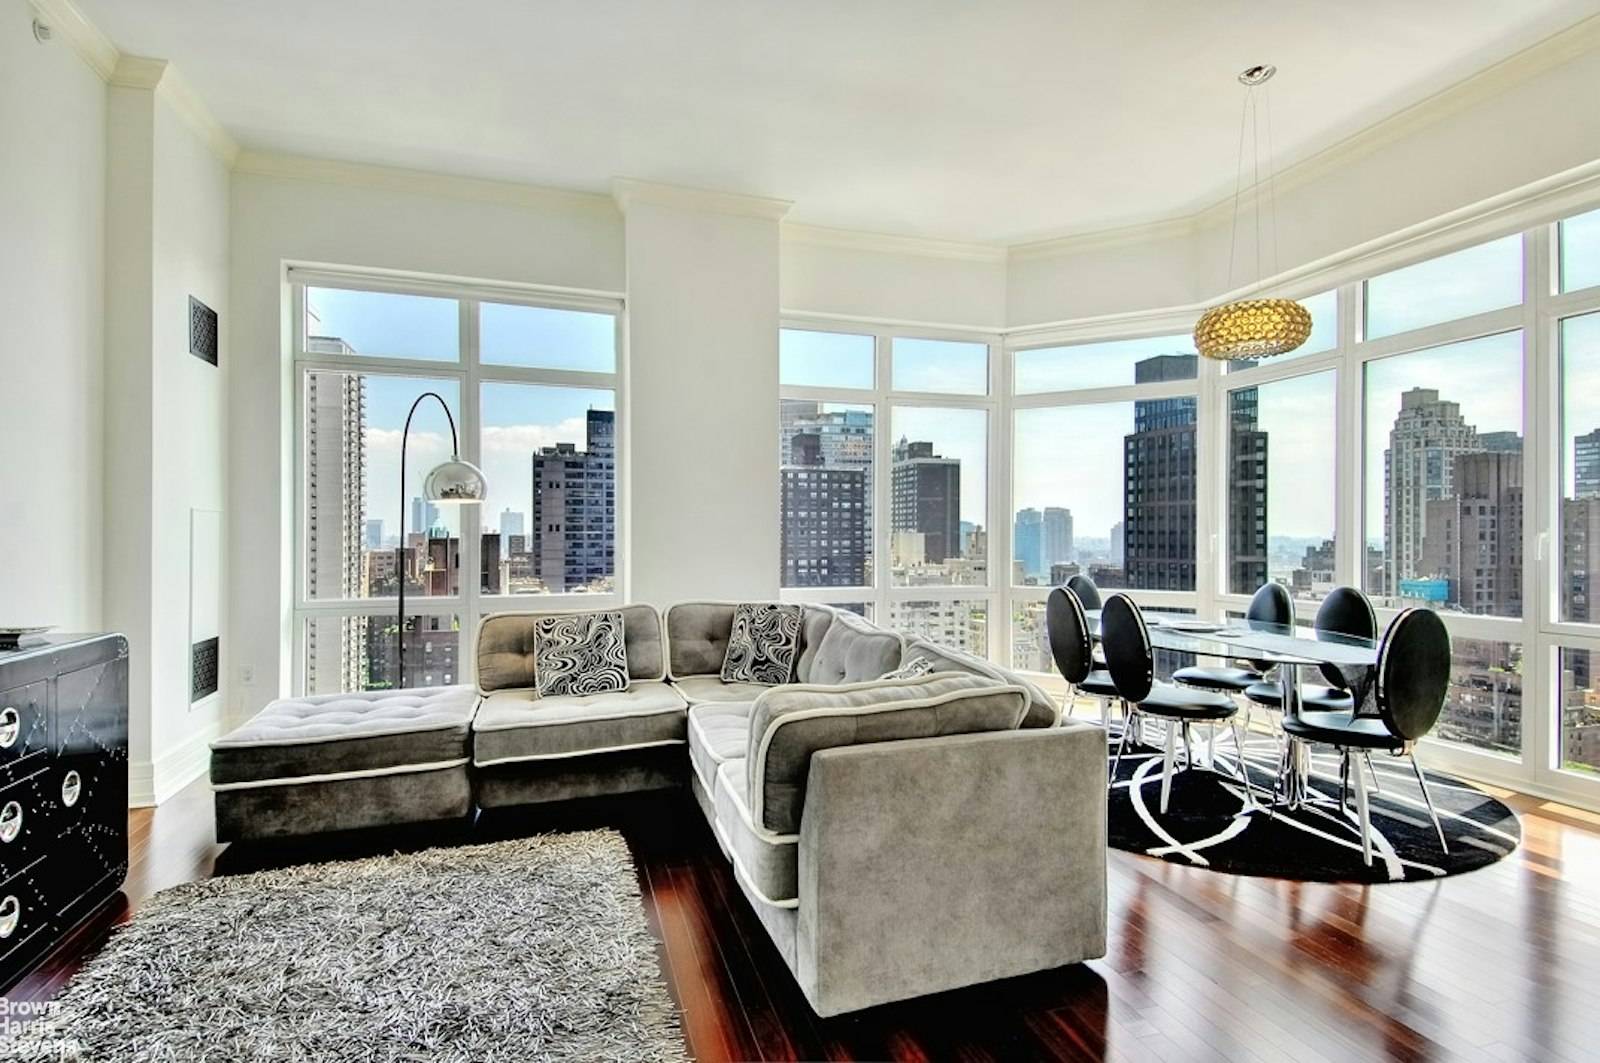 High up on the 21st floor of the sought after Milan Condominium sits Apartment 21 D, a sublime 2BR 2 BA home with 1, 480' of space amp ; with ...